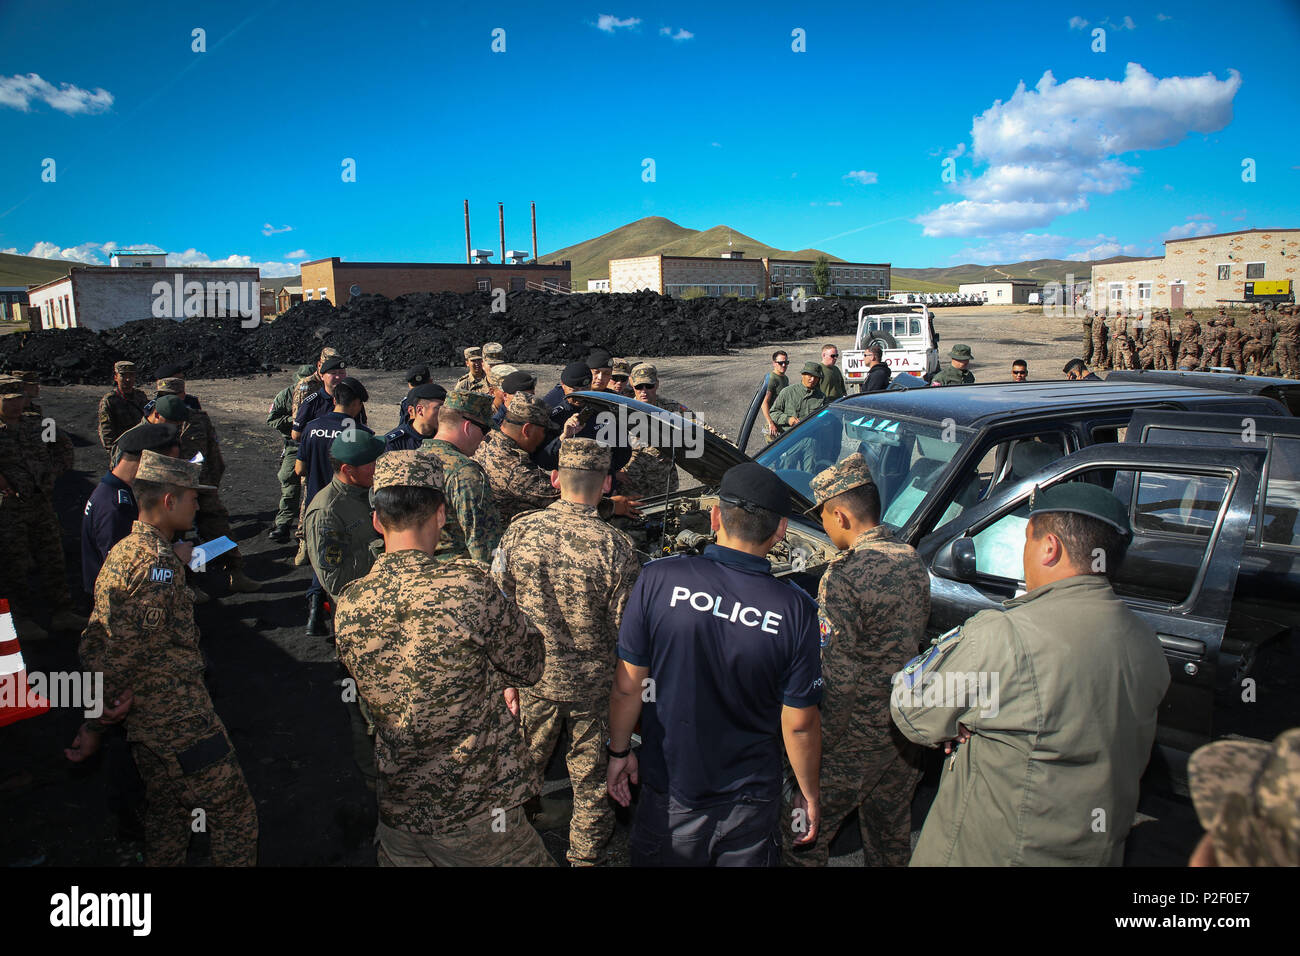 Mongolian Armed Forces and Mongolian Police learn about vehicle control points during Non-Lethal Weapons Executive Seminar (NOLES) 2016 at the Five Hills Training Area, Mongolia, Sept. 13, 2016. U.S. Marines with 3rd Law Enforcement Battalion, III Marine Expeditionary Force, instruct the Mongolian Armed Forces about the importance of vehicle control points training while maintaining peacekeeping operations. NOLES is a regularly scheduled field training exercise and leadership seminar hosted annually by various nations throughout Asia-Pacific. (U.S. Marine Corps photo by Cpl. Jonathan E. LopezC Stock Photo